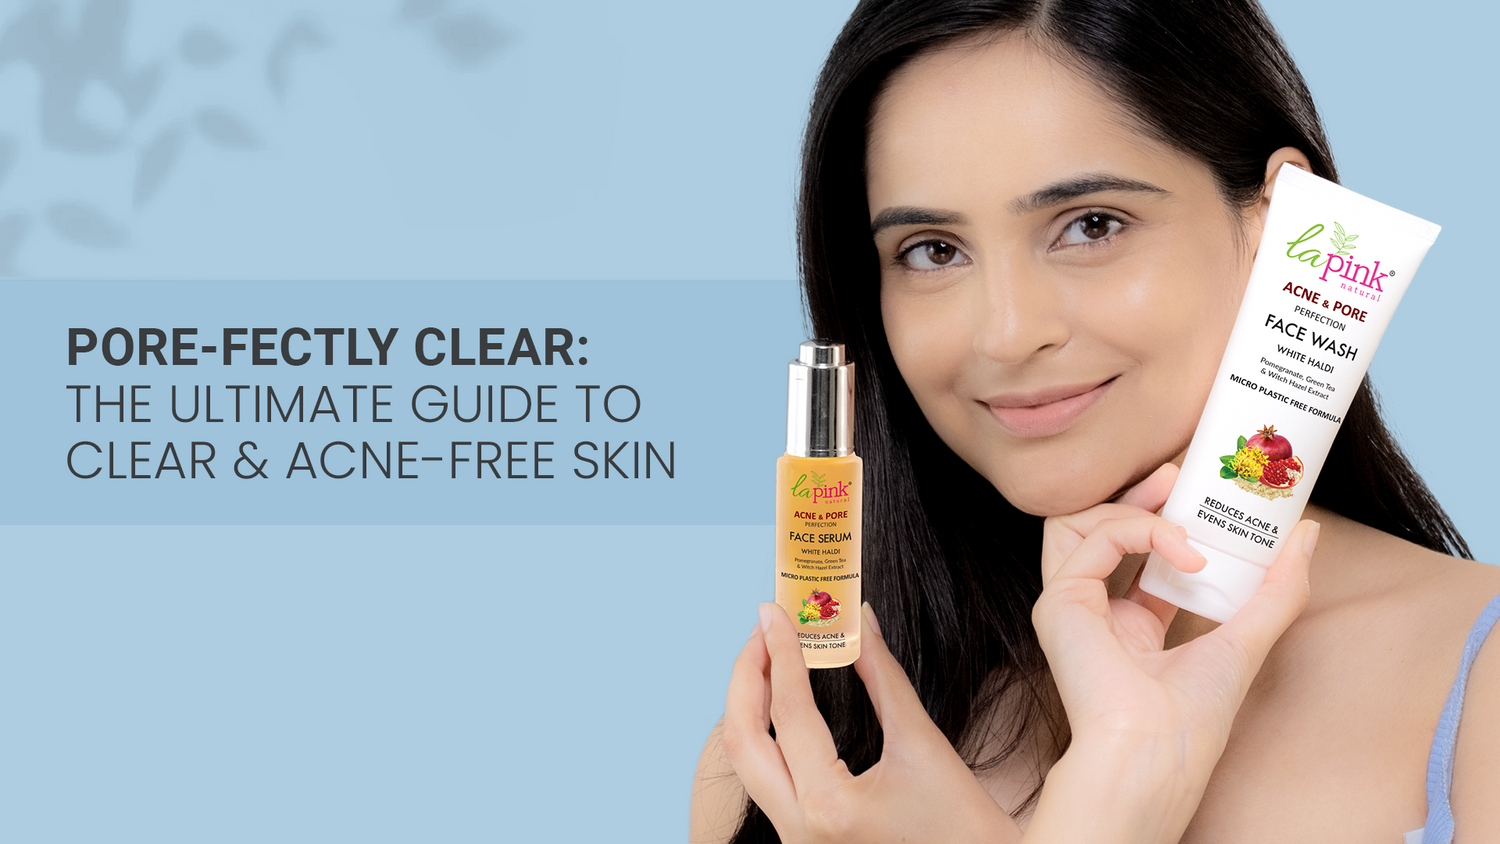 Pore-fectly Clear: The Ultimate Guide to Clear & Acne-free Skin